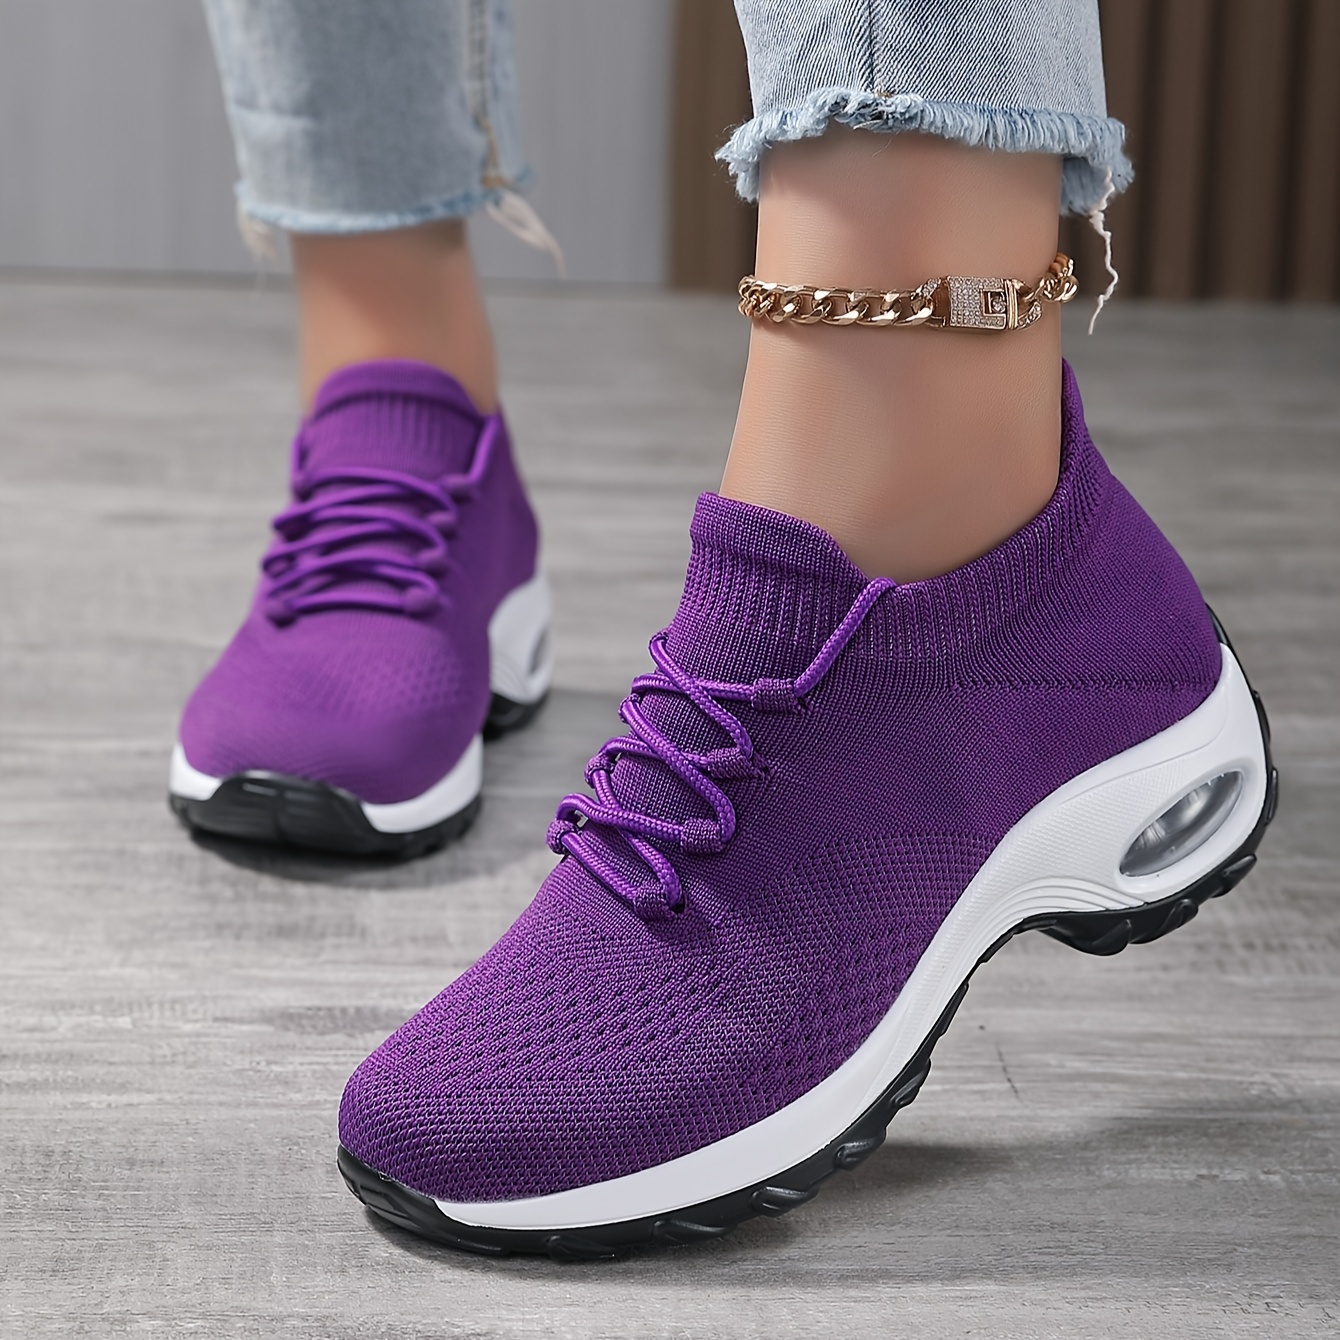 

Women's Breathable Flying Woven Chunky Sneakers, Casual Lace Up Outdoor Shoes, Comfortable Low Top Sport Shoes